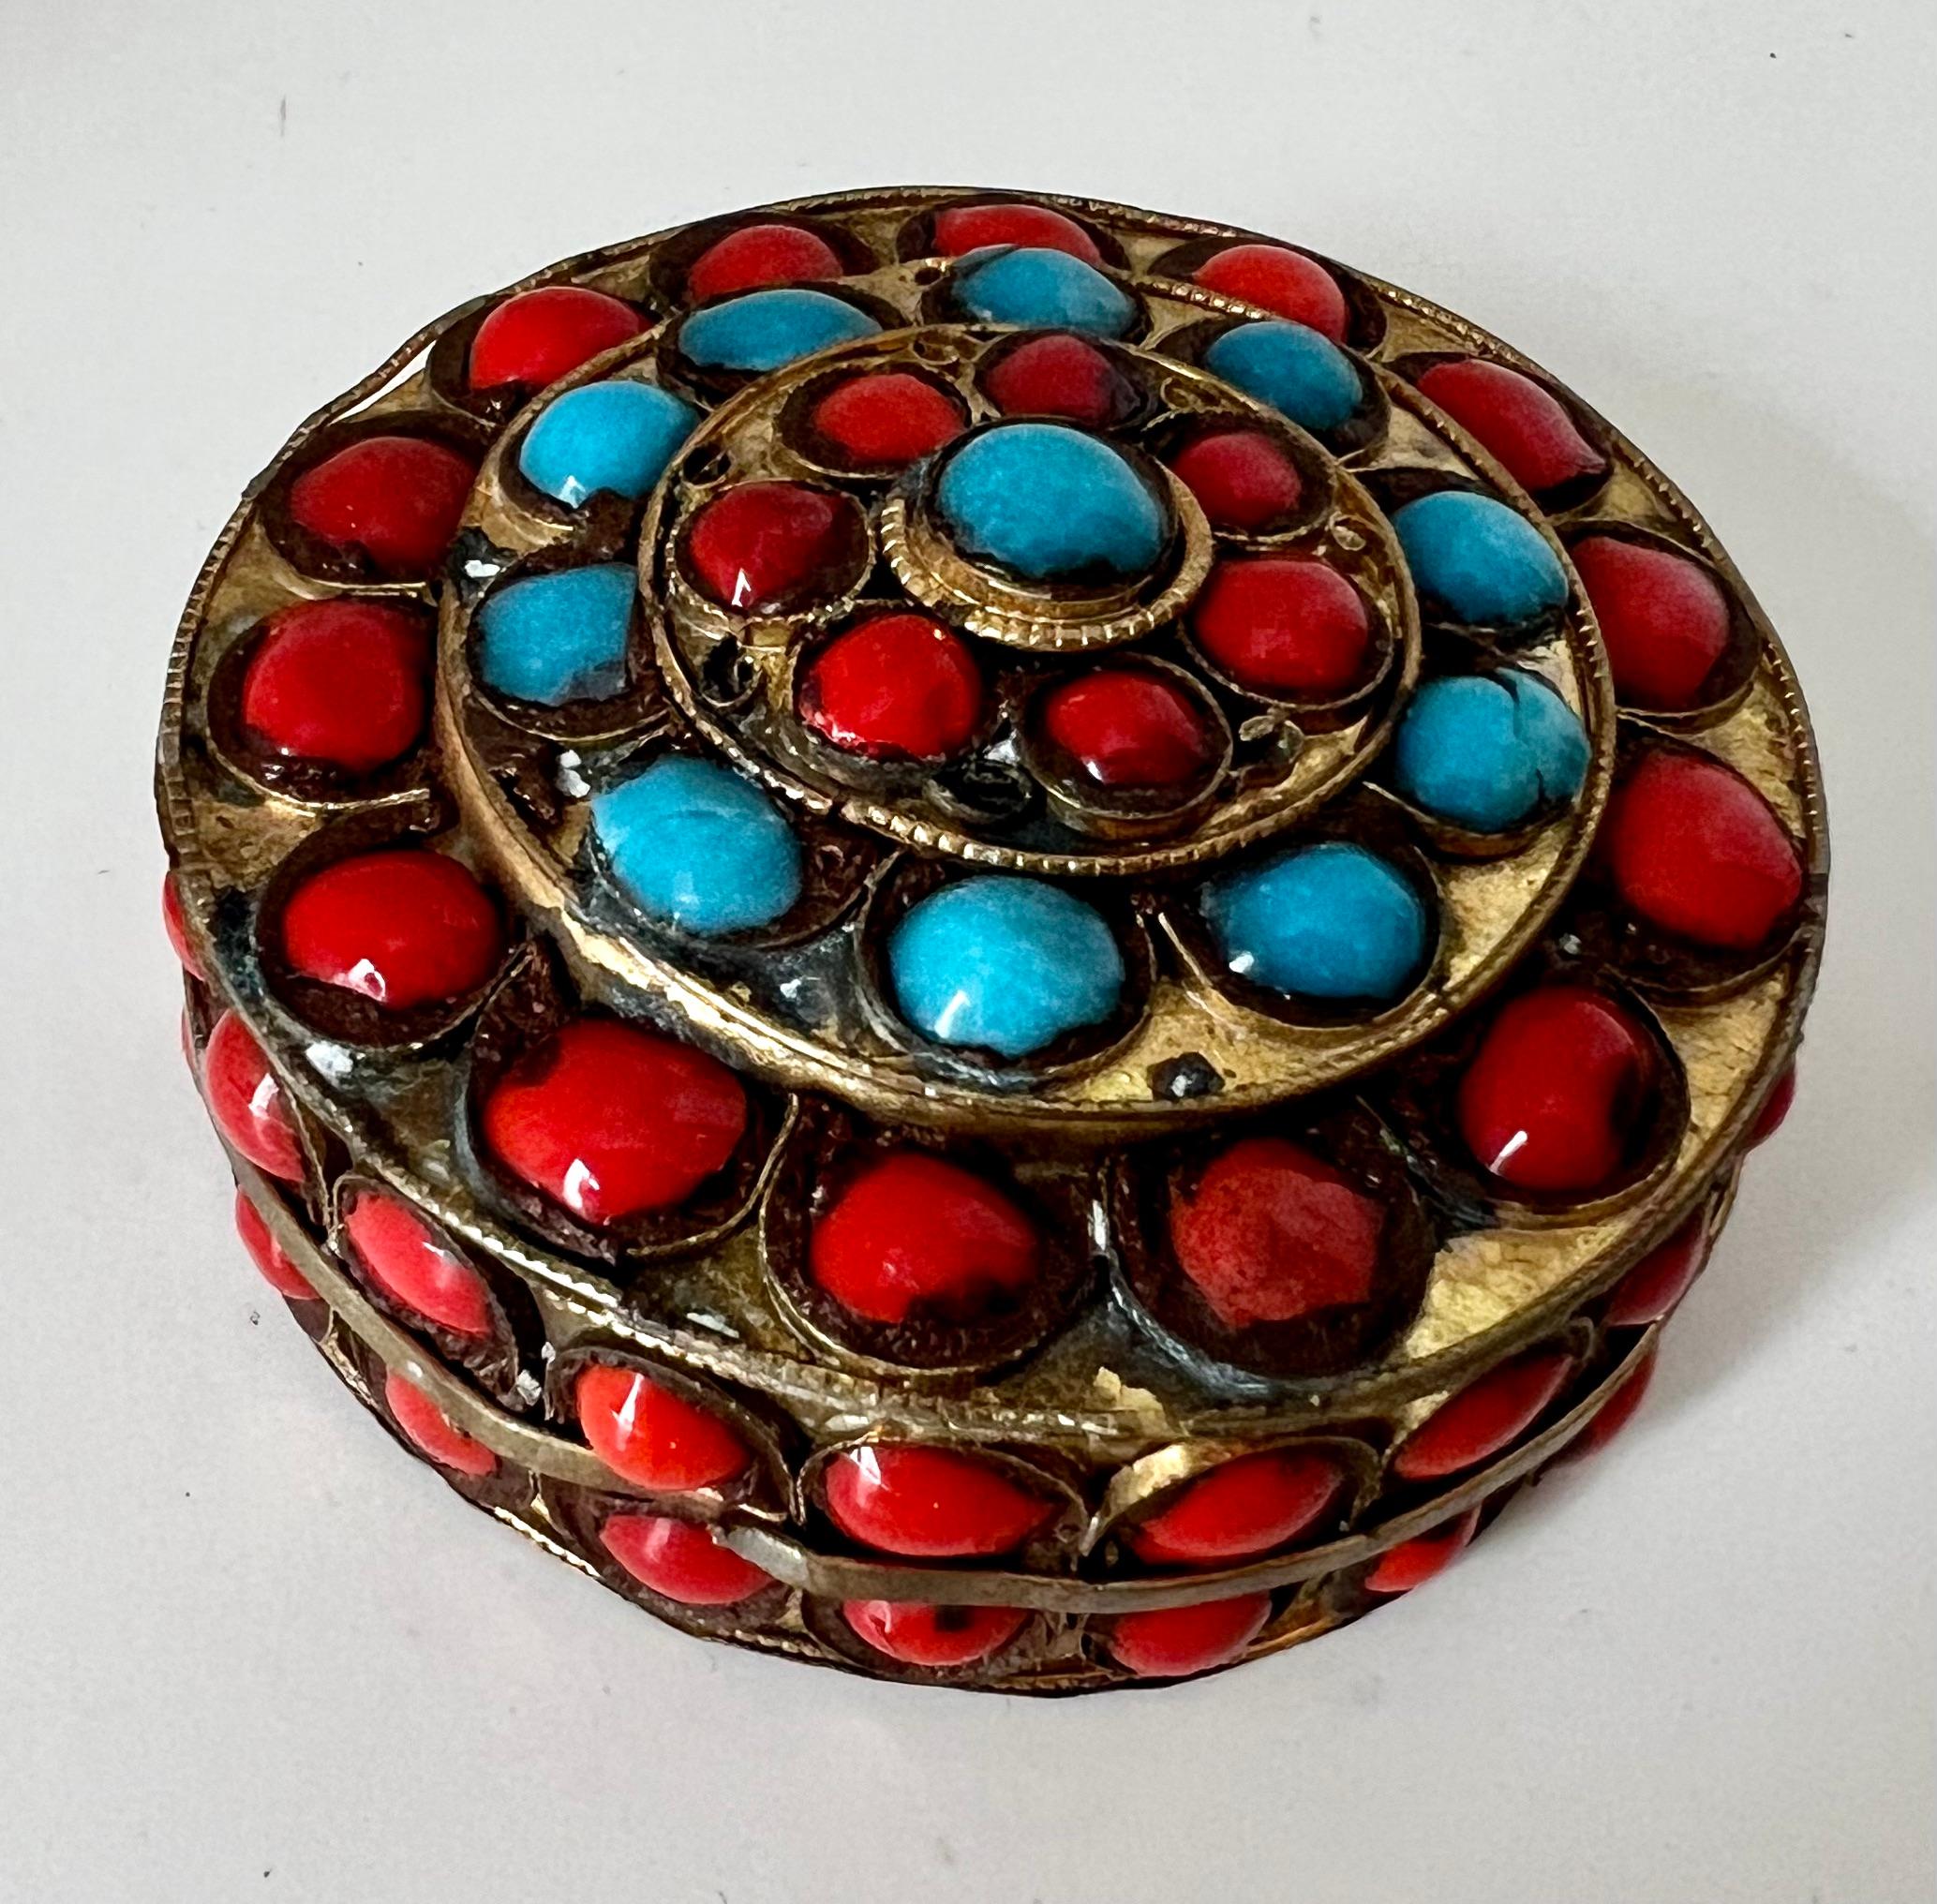 Hand-Crafted Oriental Brass Bead Stash or 420 Box For Sale